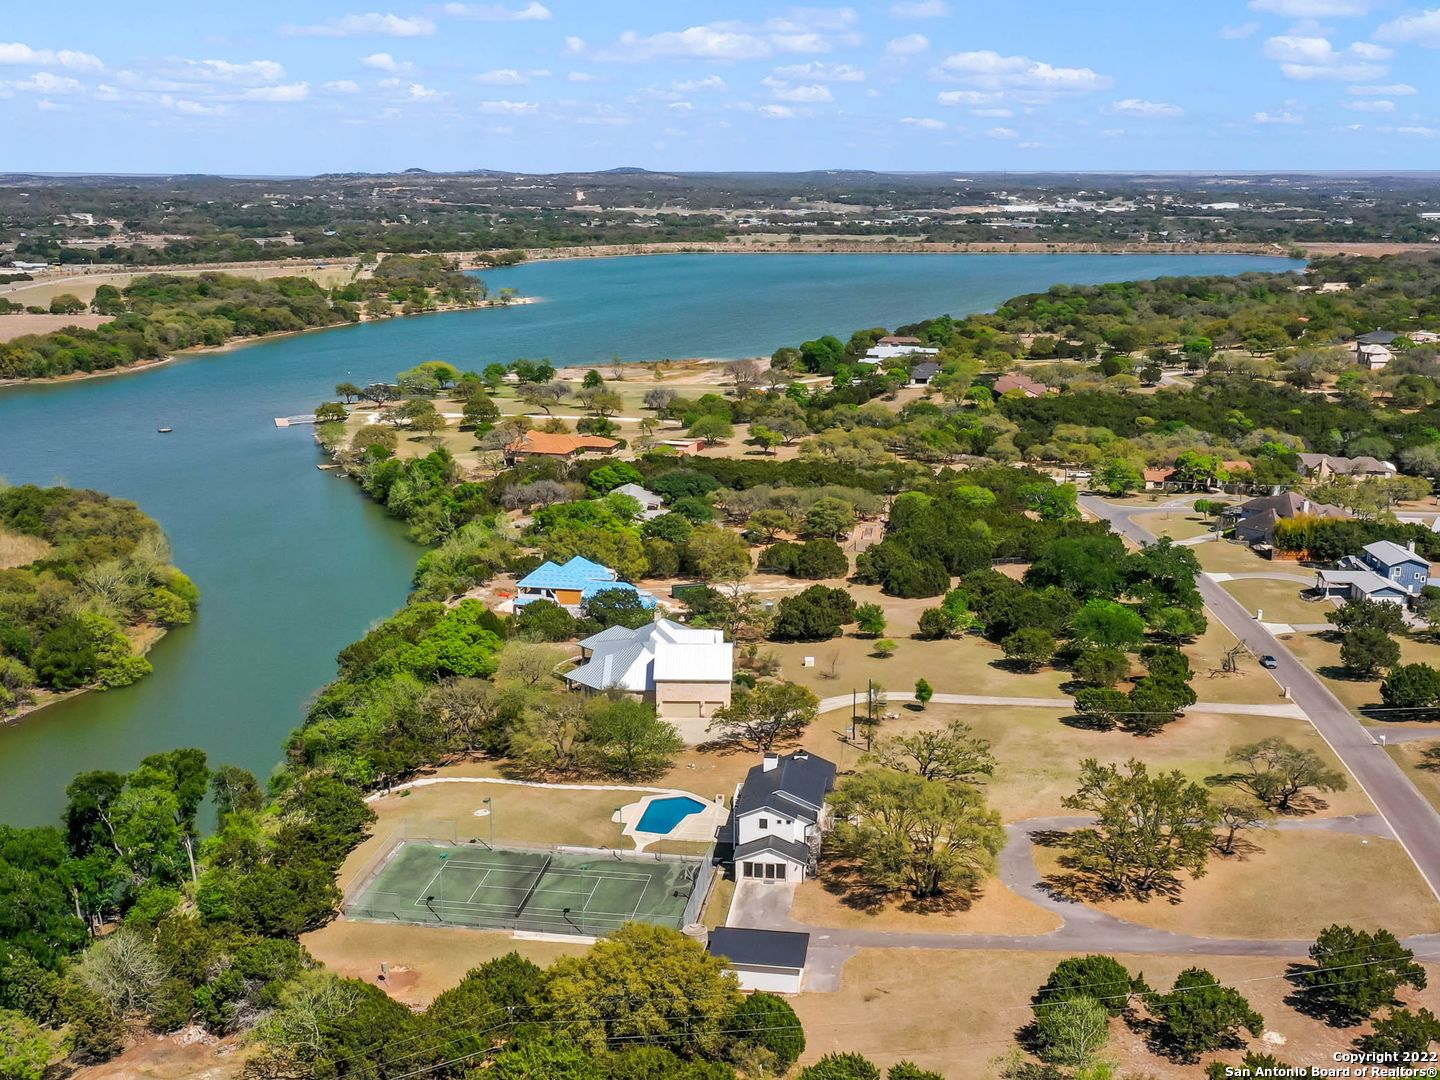 A truly unique getaway property with pristine waterfront, where panoramic lake and sunset views of Boerne Lake is your backdrop. Nestled on a rare grey lot, grandfathered with no HOA restrictions, totaling over 4 acres for unmatched lakefront living. Abundant natural lighting fills the home and floods the interiors with an exceptional floor-plan. Light-filled living with gorgeous hard wood floors, soaring cathedral ceiling and walls of windows for seamless indoor-outdoor living and a gourmet kitchen overlooking the outdoor oasis. A master retreat is found upstairs complete with a sun-filled spa like bathroom. At the lower levels leading outdoors are the remaining spacious guest bedrooms and an oversized game-room. Enjoy tranquility outdoors with a large covered wooden deck leading to a sparkling pool and full sized sports court. As one of the twelve properties in the entire subdivision with direct lake access, a flagstone walkway leads you down to your private 20 foot dock and flagstone hard-decking for multiple entertaining spaces. An exemplary offering with endless possibilities within Lake Country in Boerne.